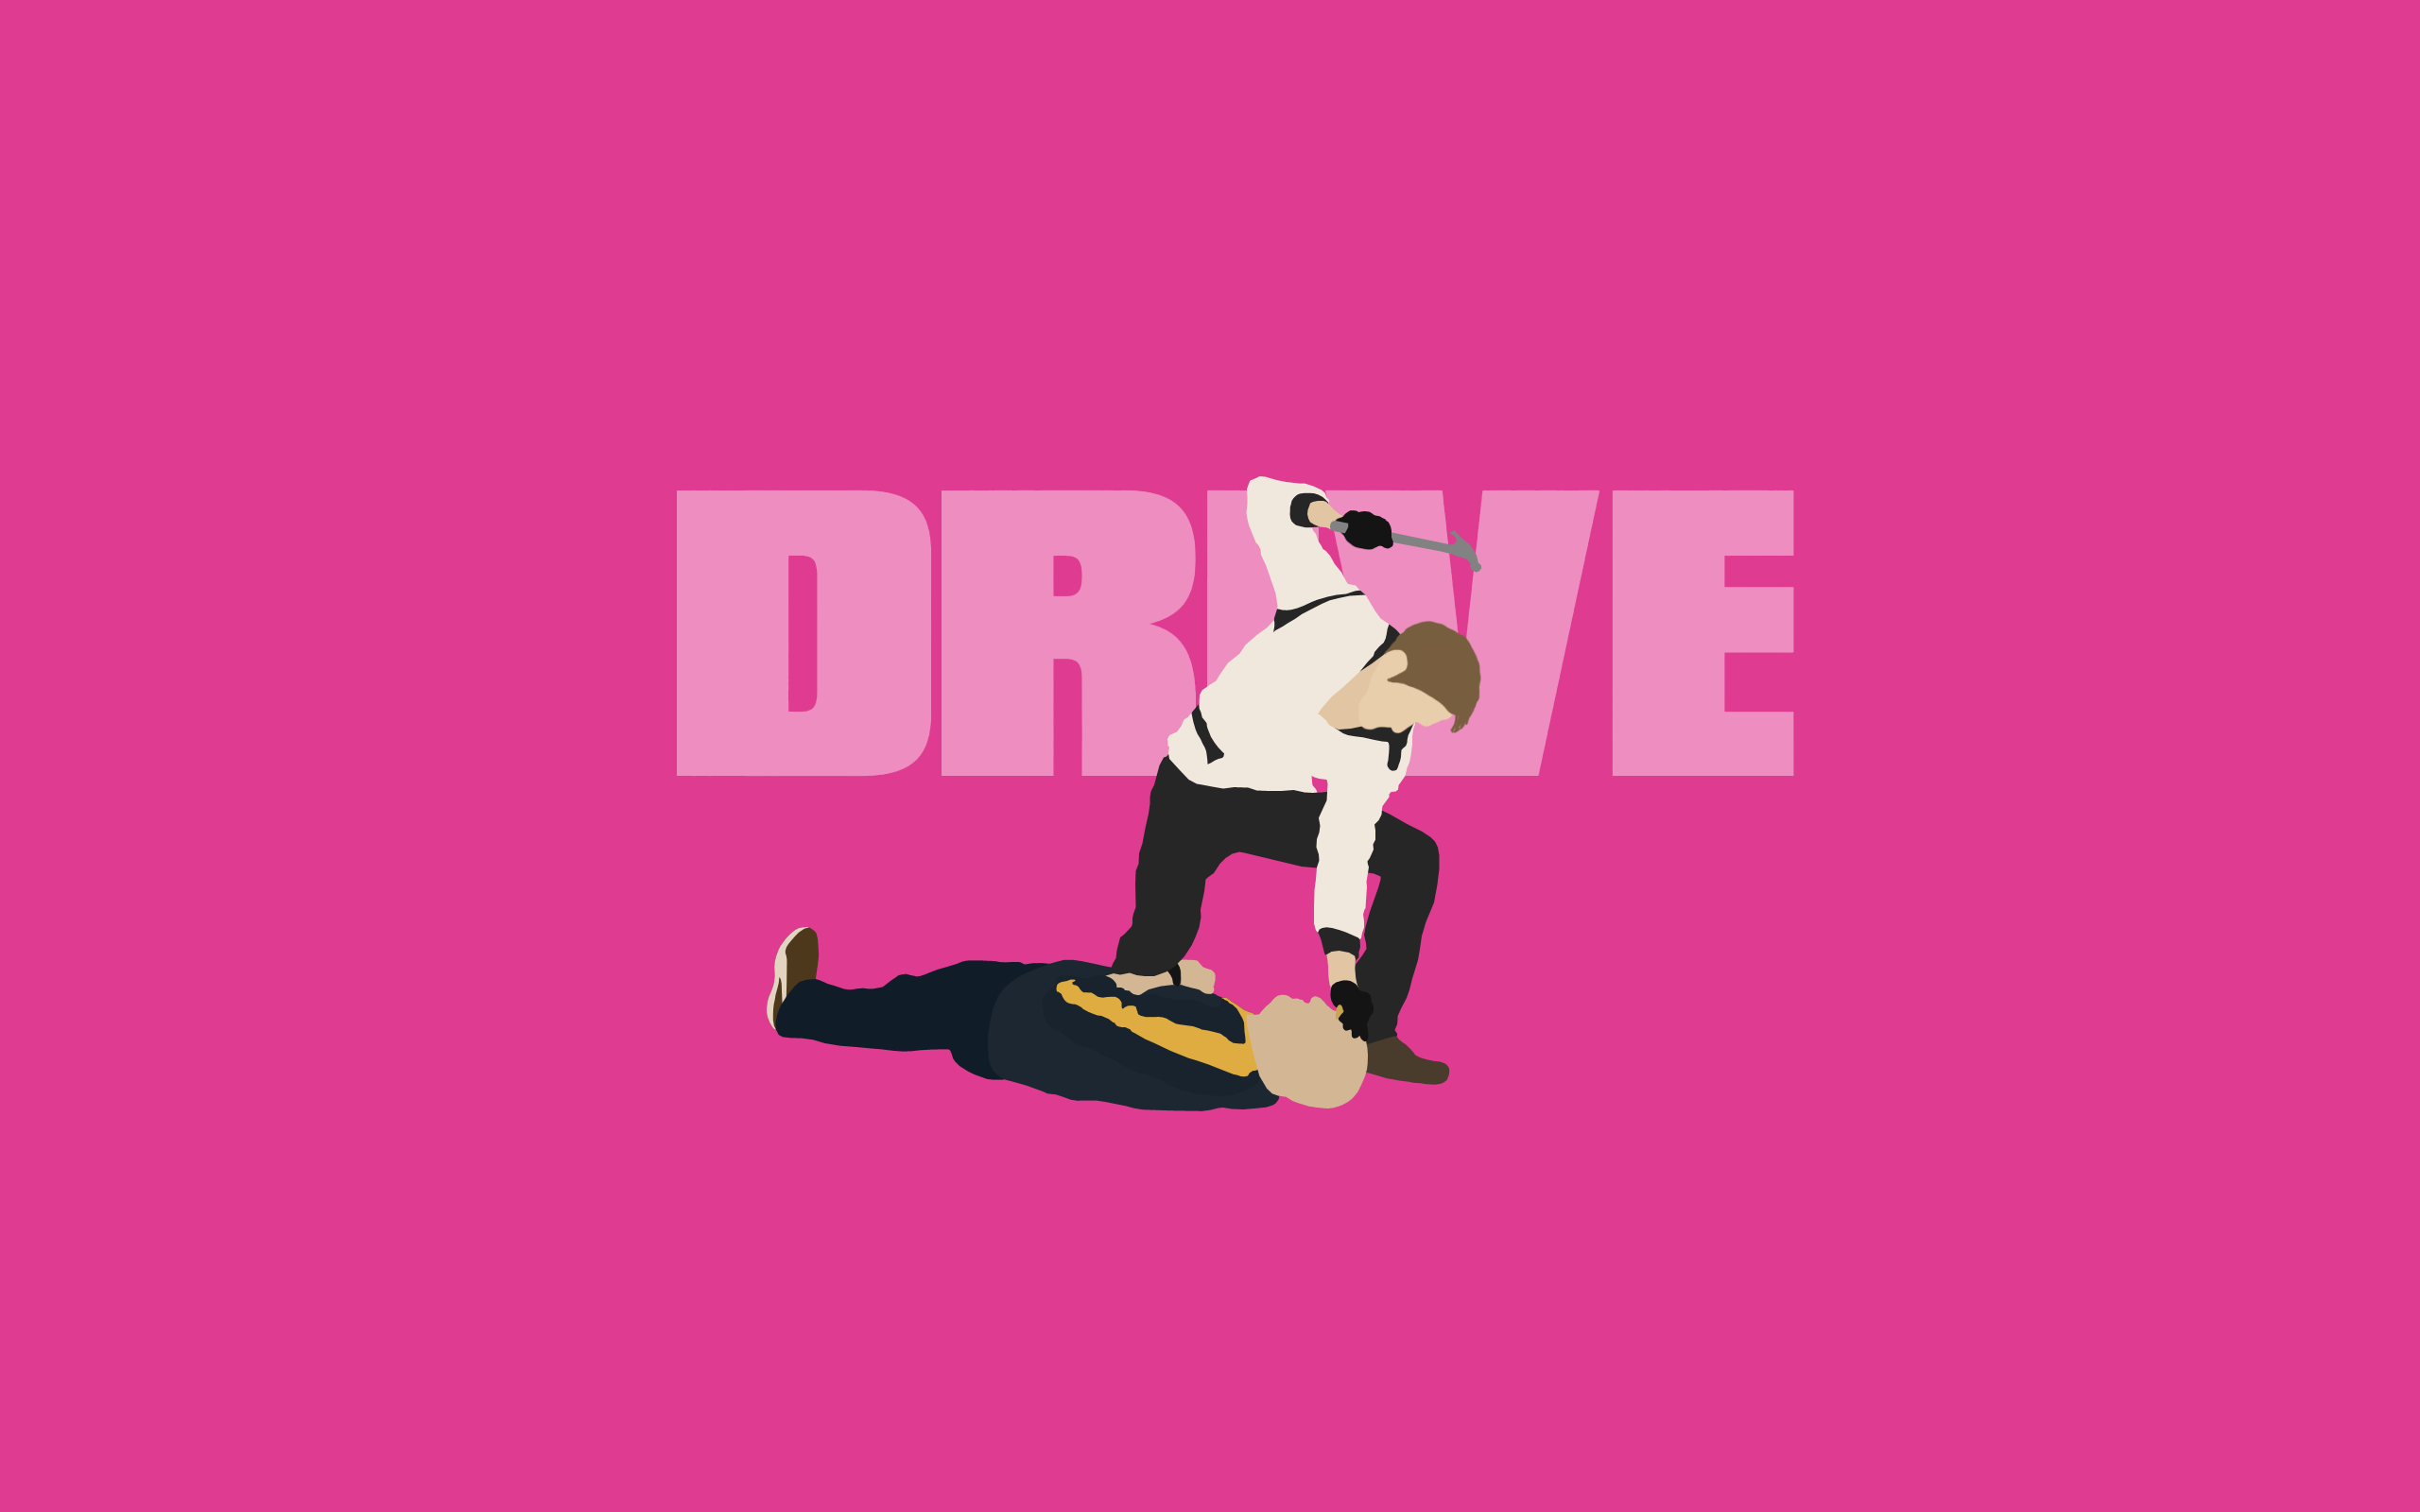 Drive (2011) Wallpapers